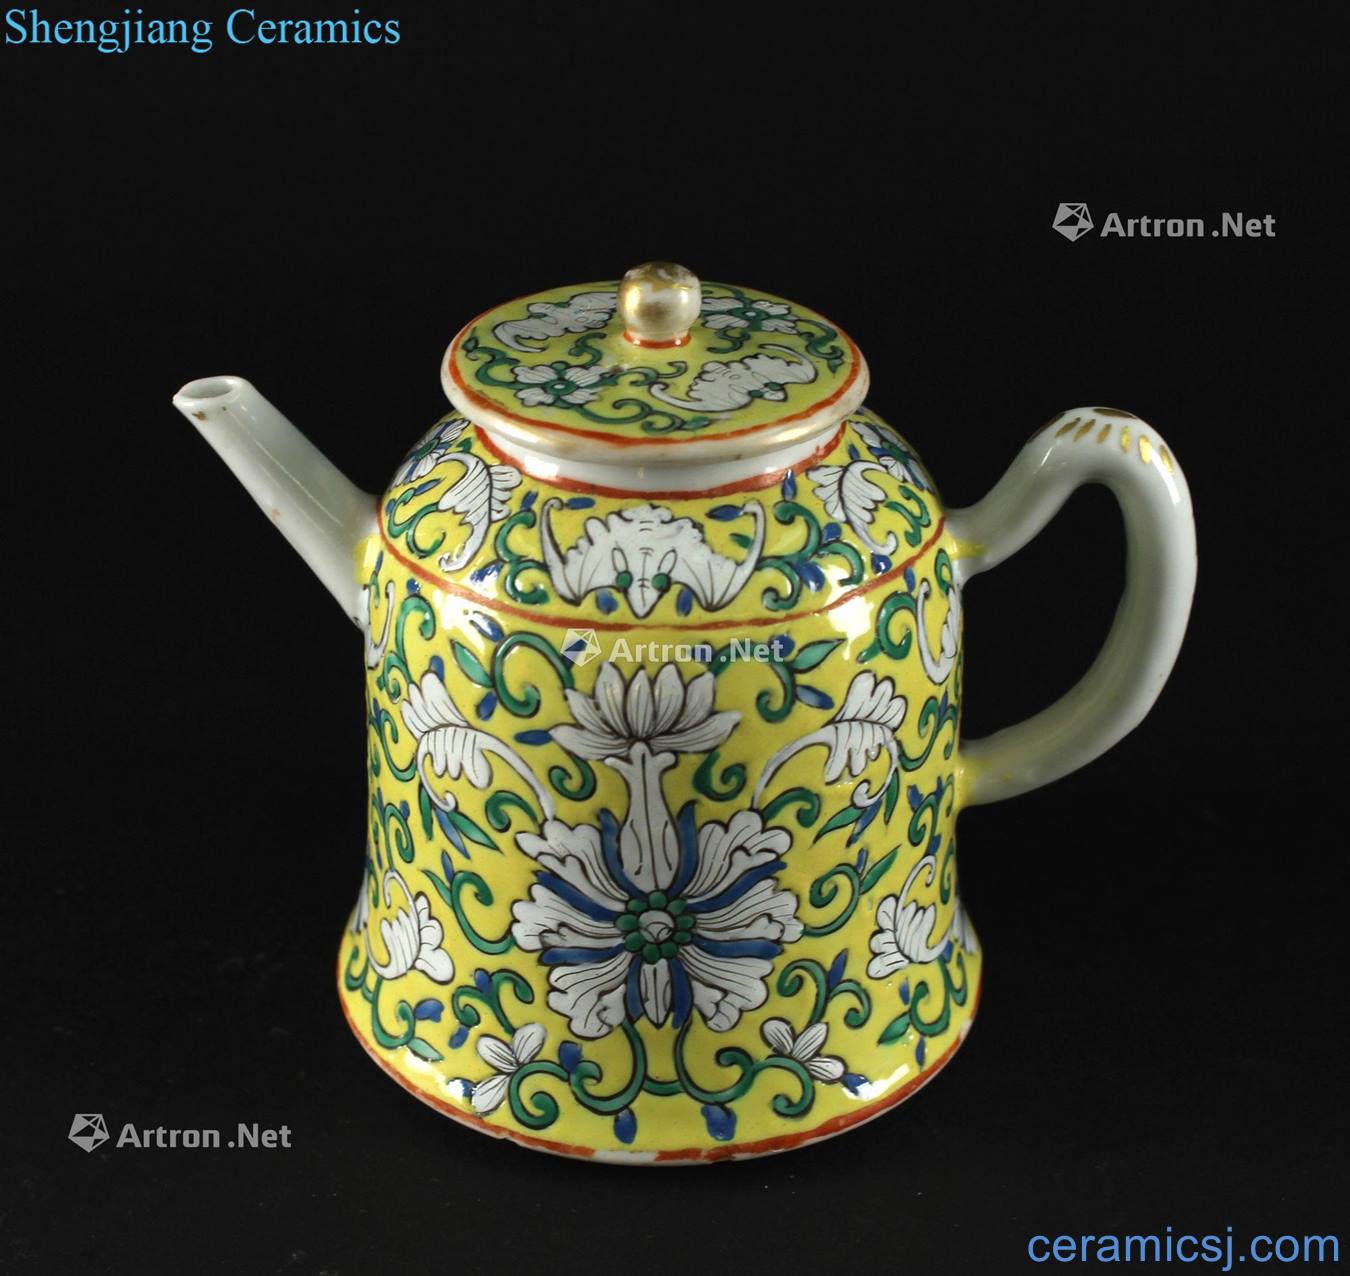 The late qing dynasty to pastel yellow treasure phase pattern bell pot